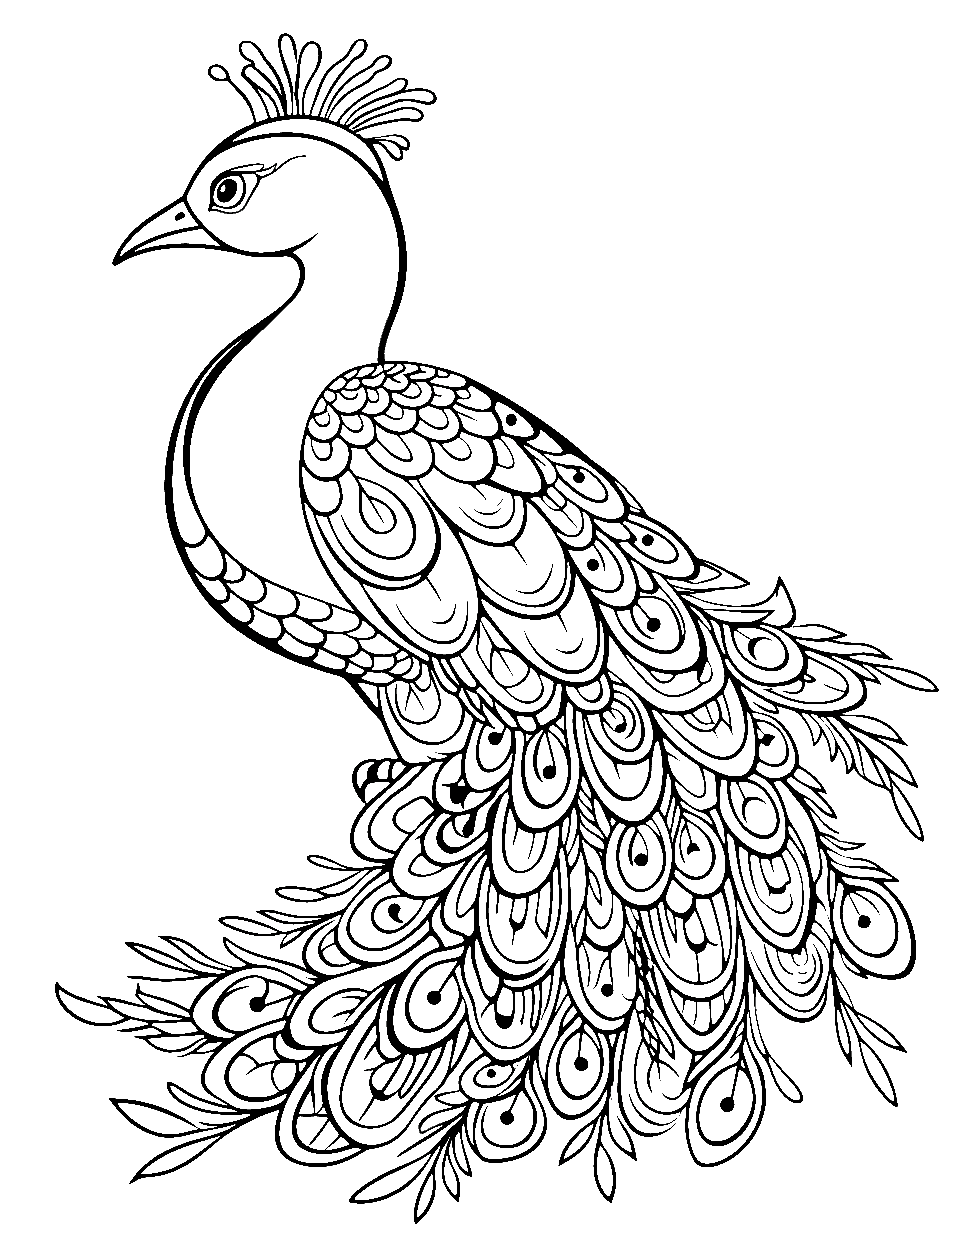 Peacock's Majestic Tail Coloring Page - A proud peacock displaying its radiant tail feathers.